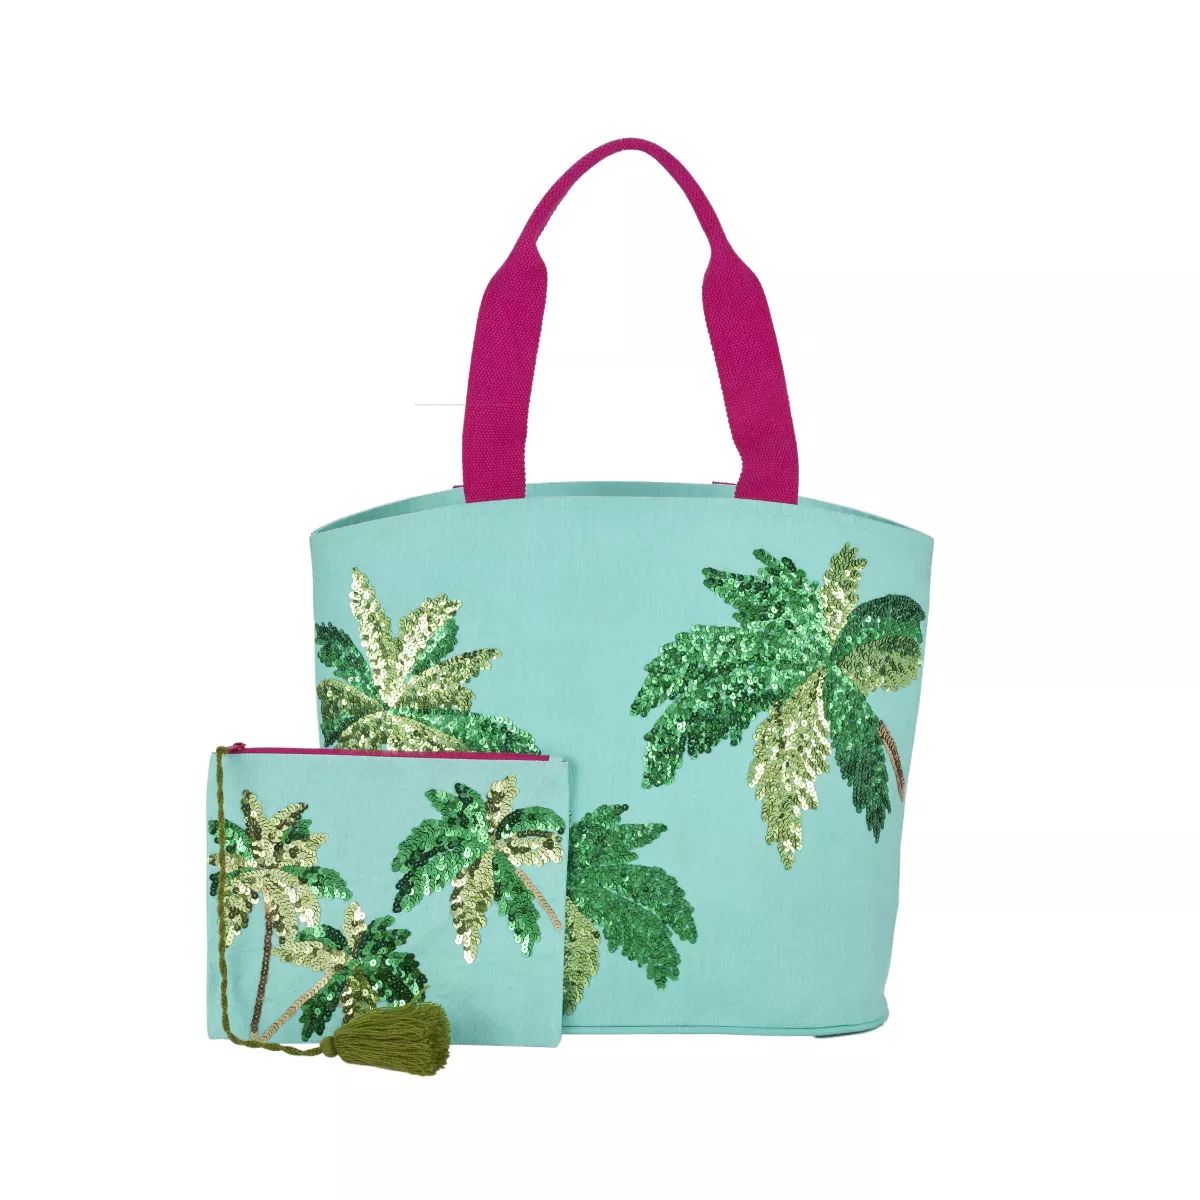 Mina Victory Sequin Palm Trees 22" x 15" x 6" Beach Bag with Matching Clutch Turquoise | Target